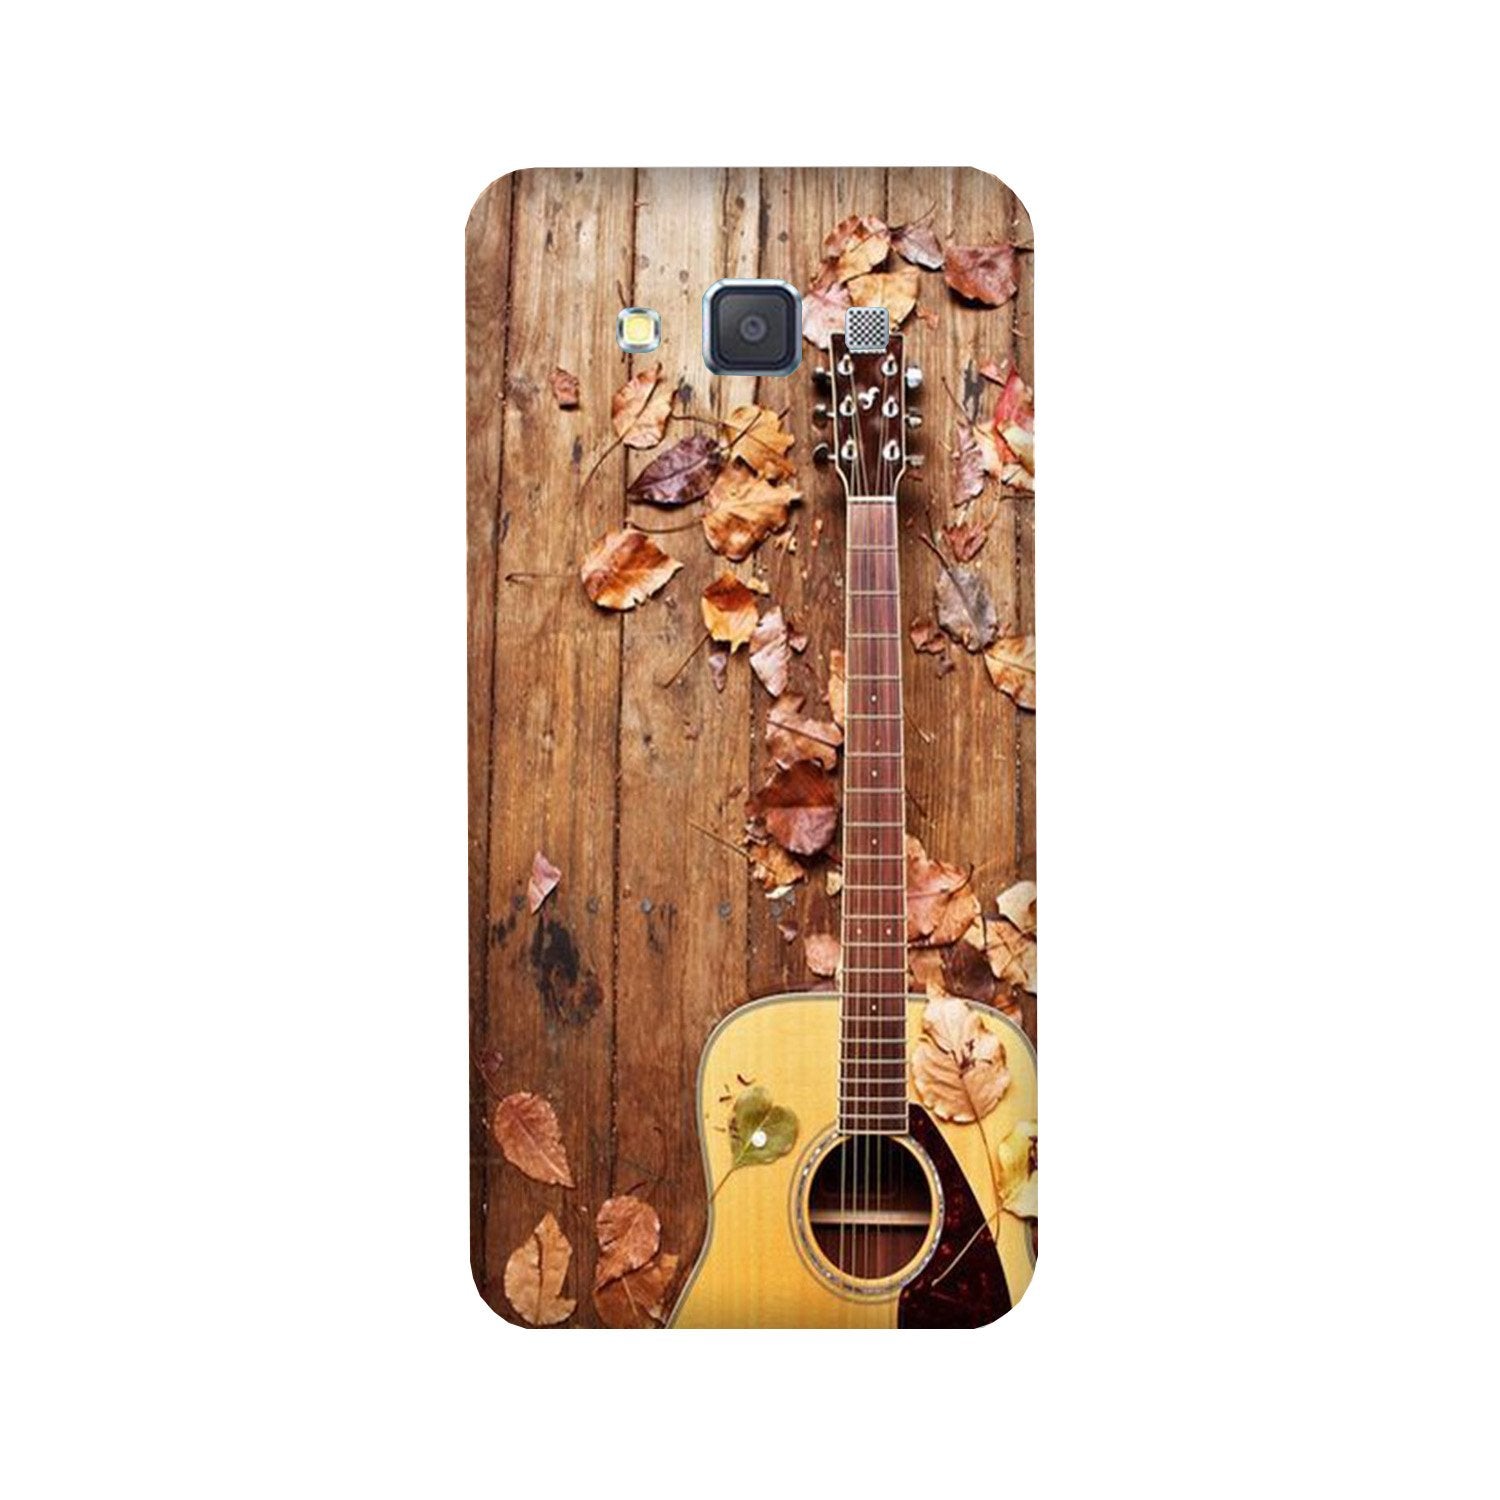 Guitar Case for Galaxy Grand 2